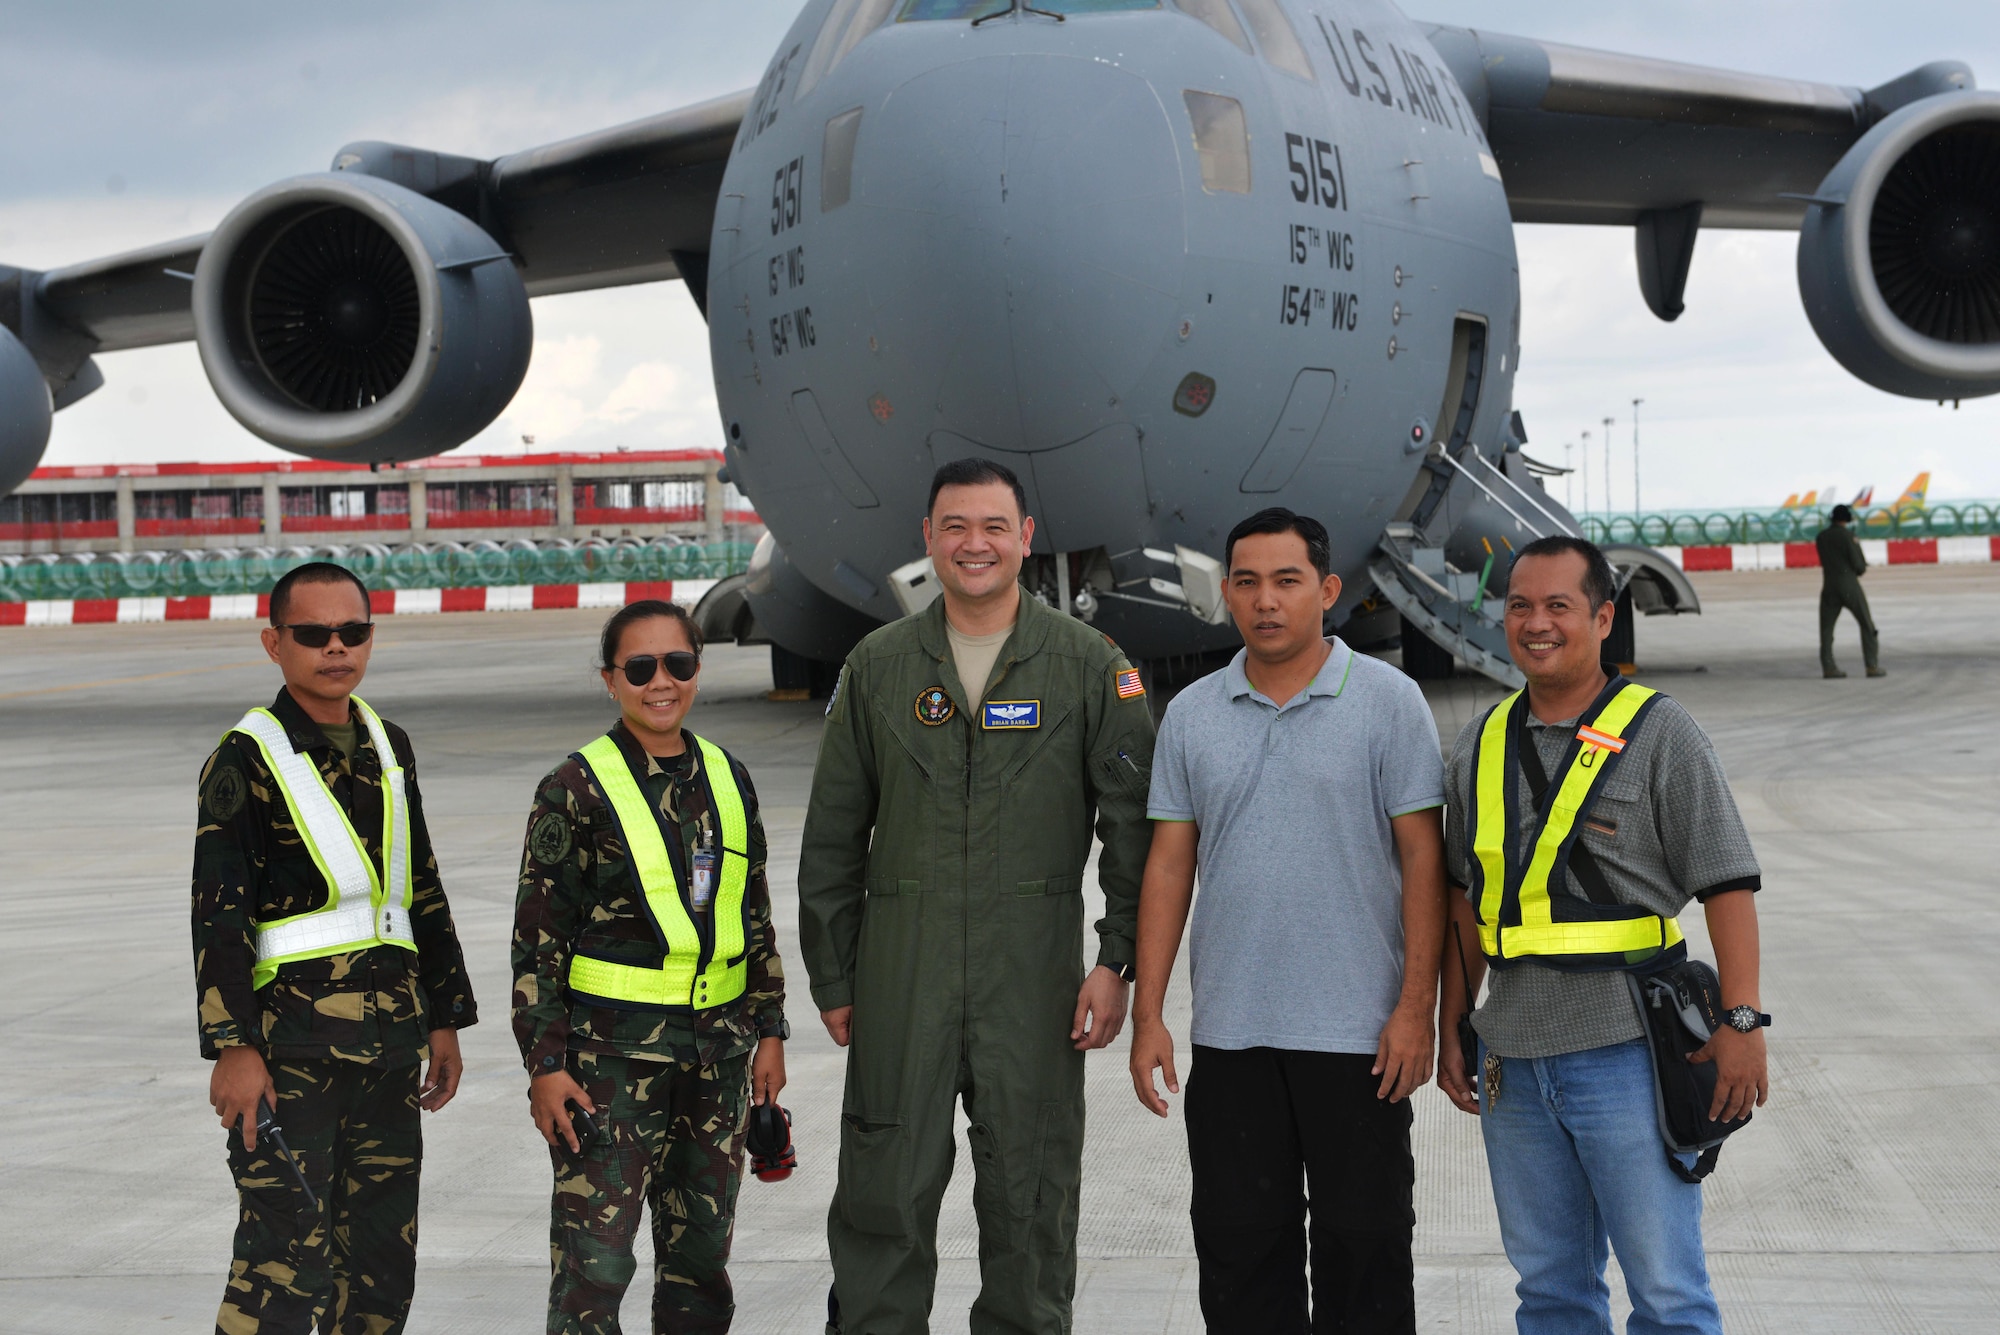 Members of the Philippines Air Force stand with U.S. Air Force Maj. Brian Barba, Joint U.S. Military Assistance Group Chief of Air Operations, in front of a U.S. Air Force C-17 at Mactan Air Base, Philippines, Sept. 24, 2016. The military members were in Mactan in support of U.S. Pacific Command’s ongoing Air Contingent mission. The goal of the rotation is for Philippine military and civilian leaders to work with their U.S. counterparts to improve airlift capabilities across the spectrum of military operations and to solidify long-standing relationships in the region. (U.S. Air Force photo by Capt. Mark Lazane)